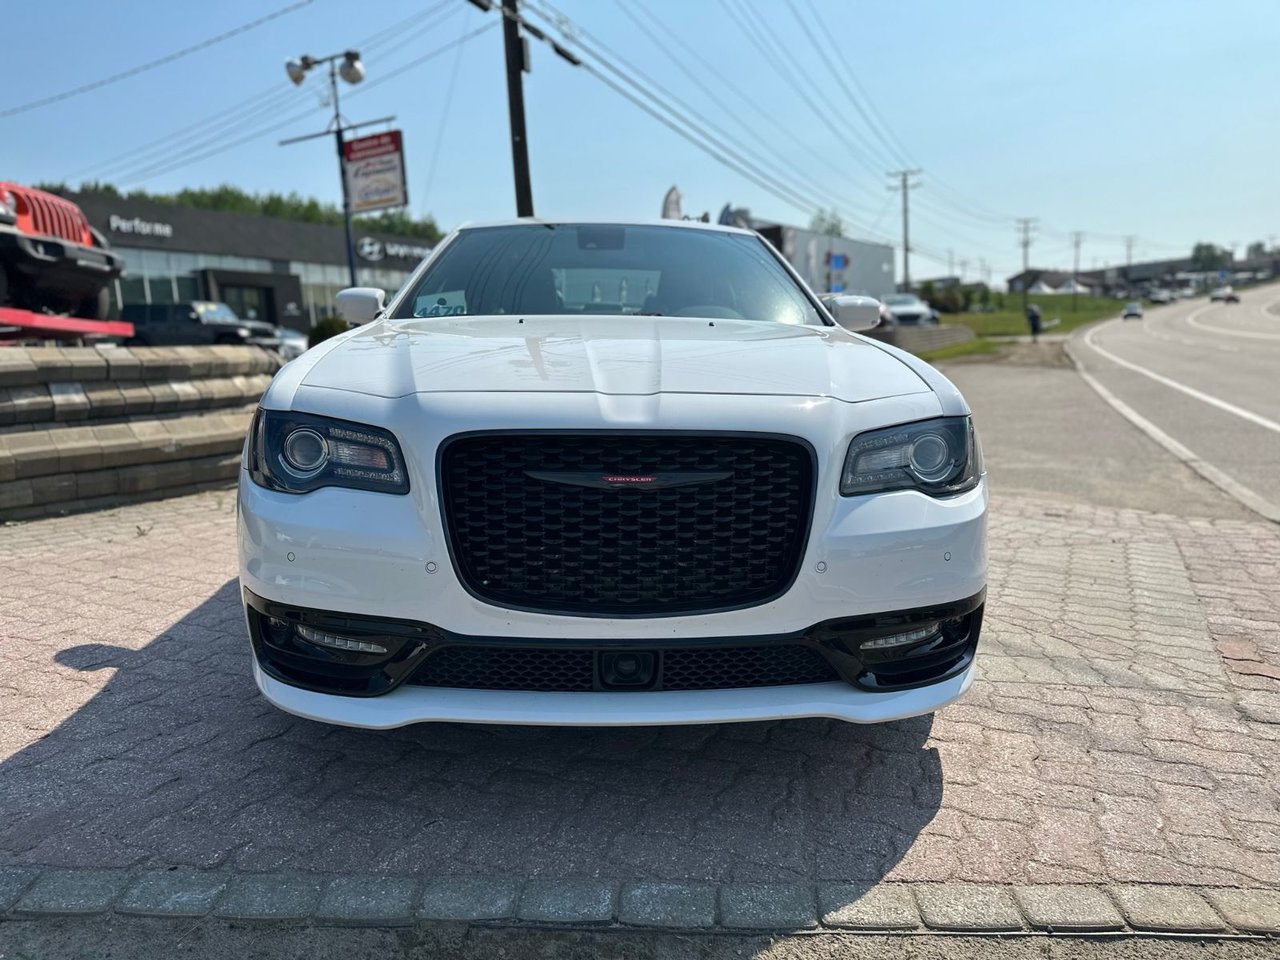 Used 2023 Chrysler 300 with 10 km for sale at Otogo